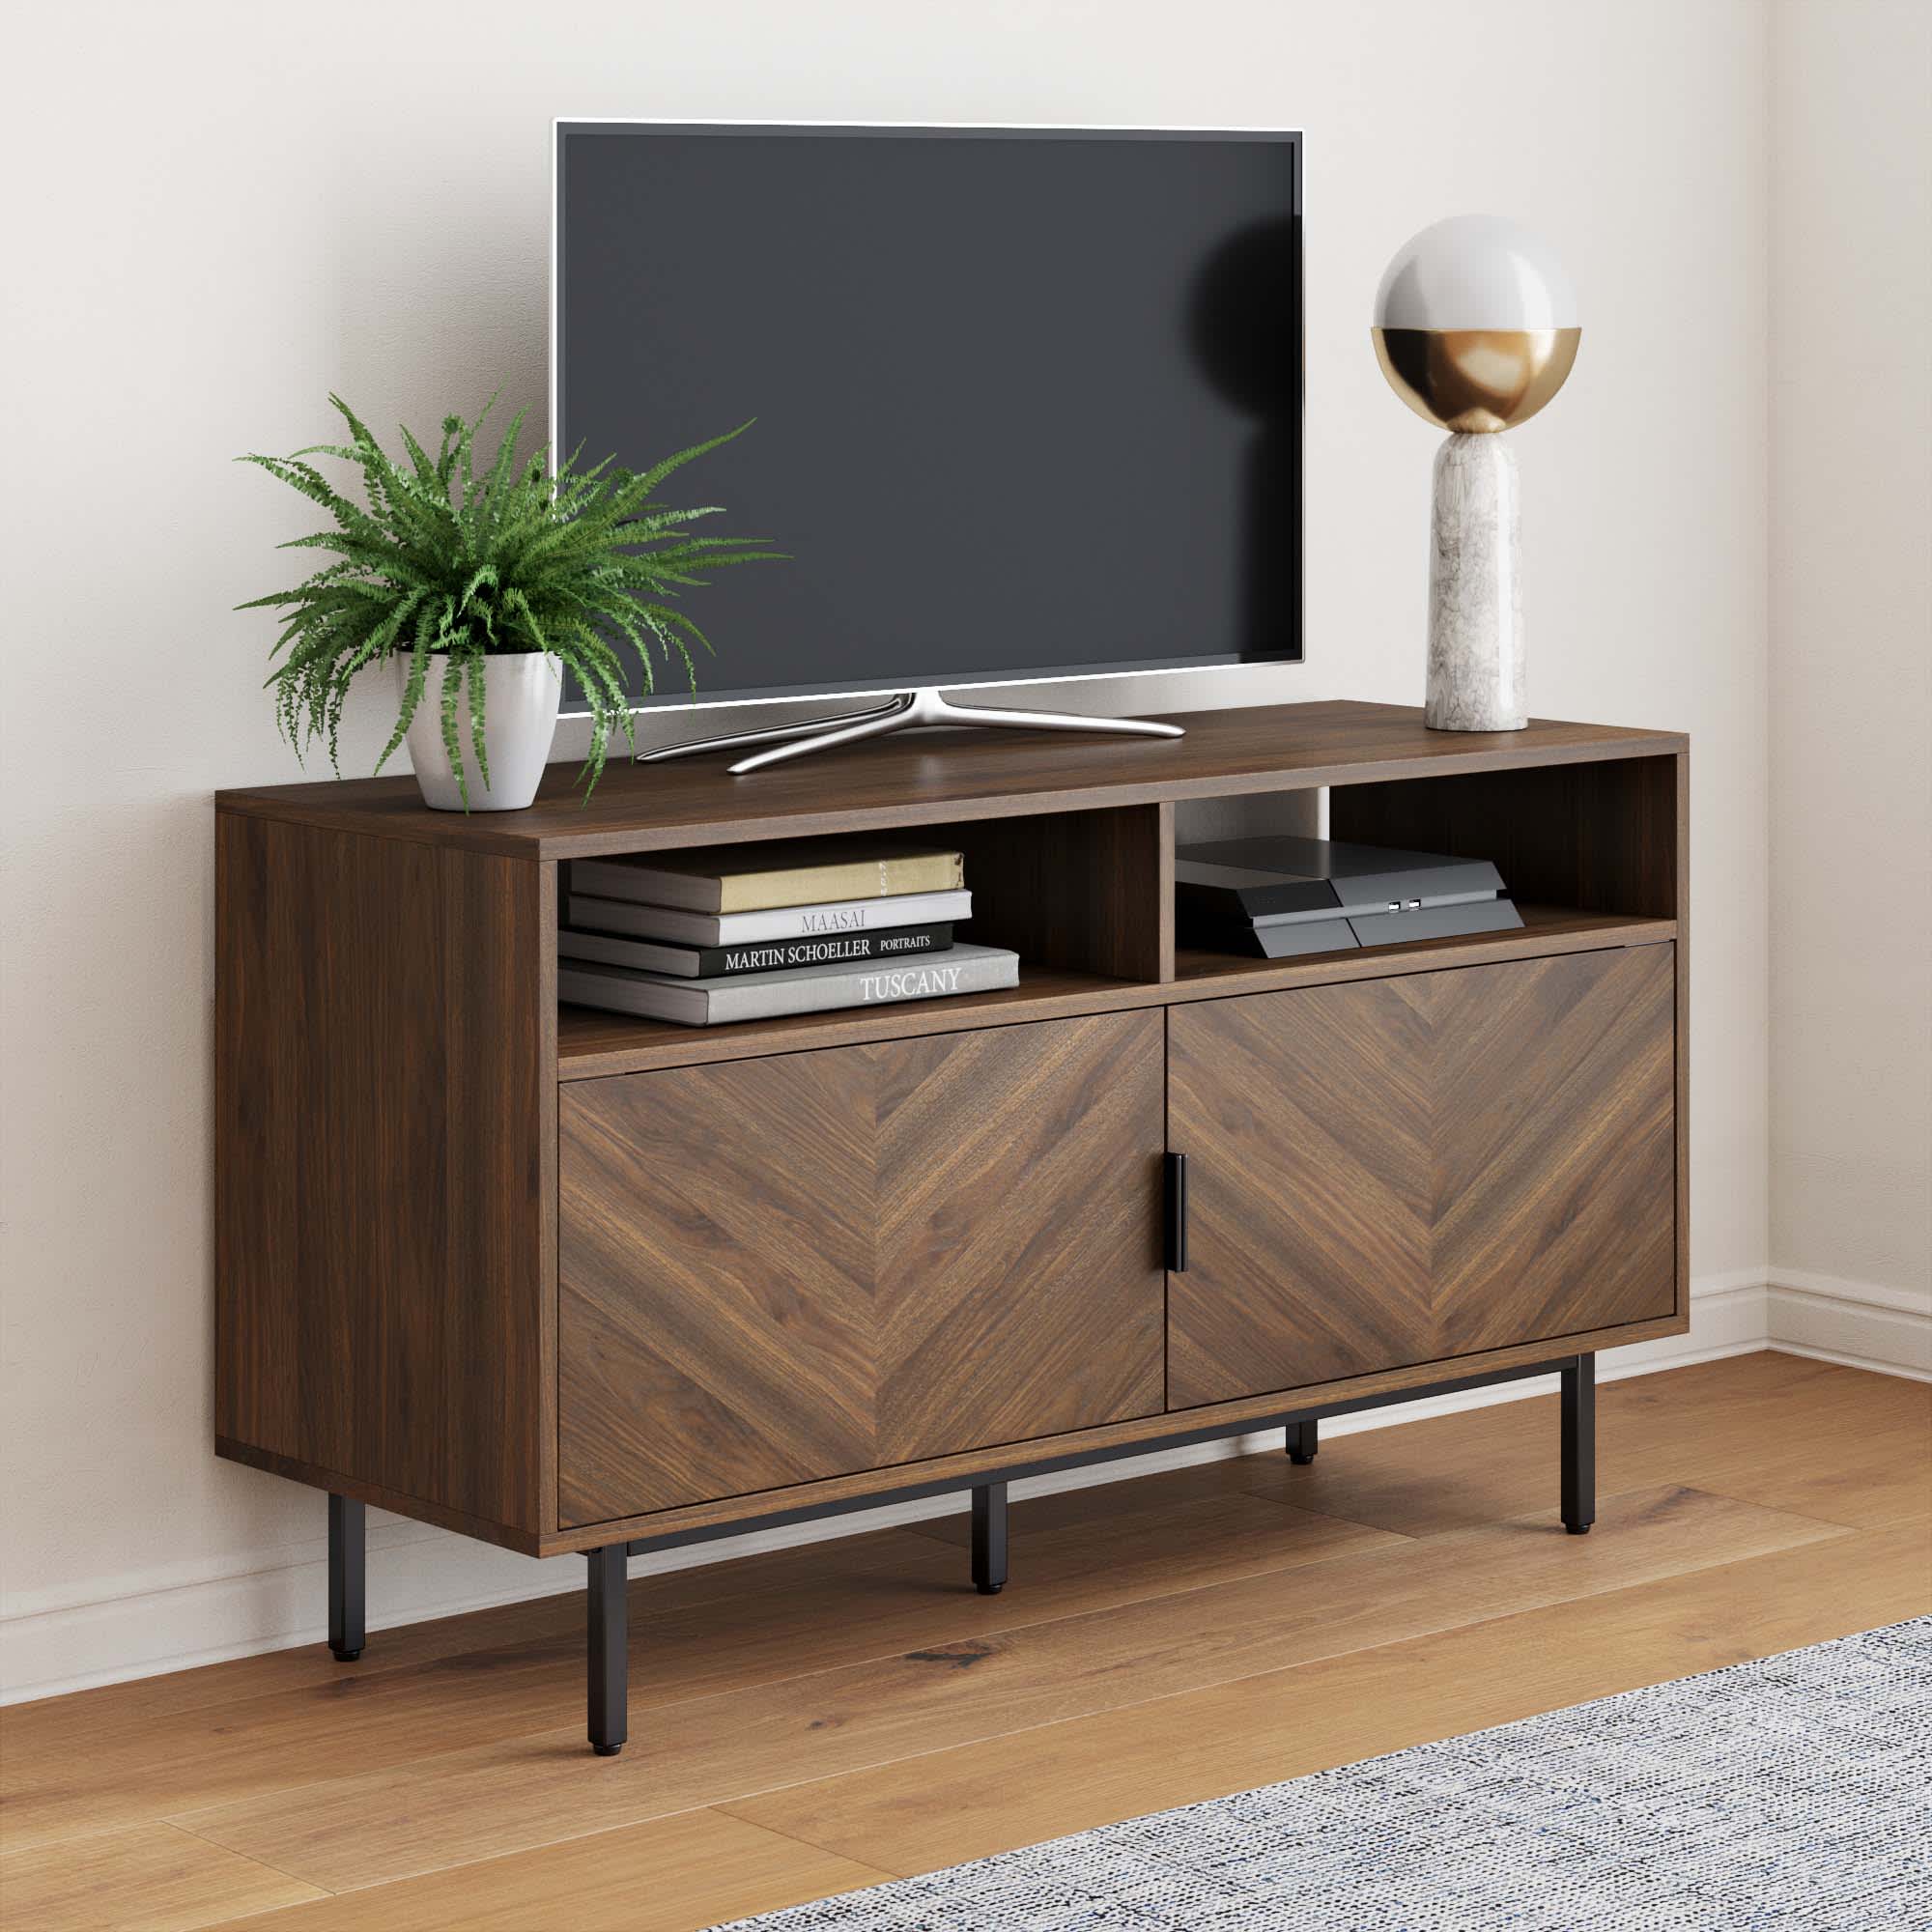 Modern TV Cabinet Stand Unit Media Storage Space Shelves Doors Drawer TV  Stand